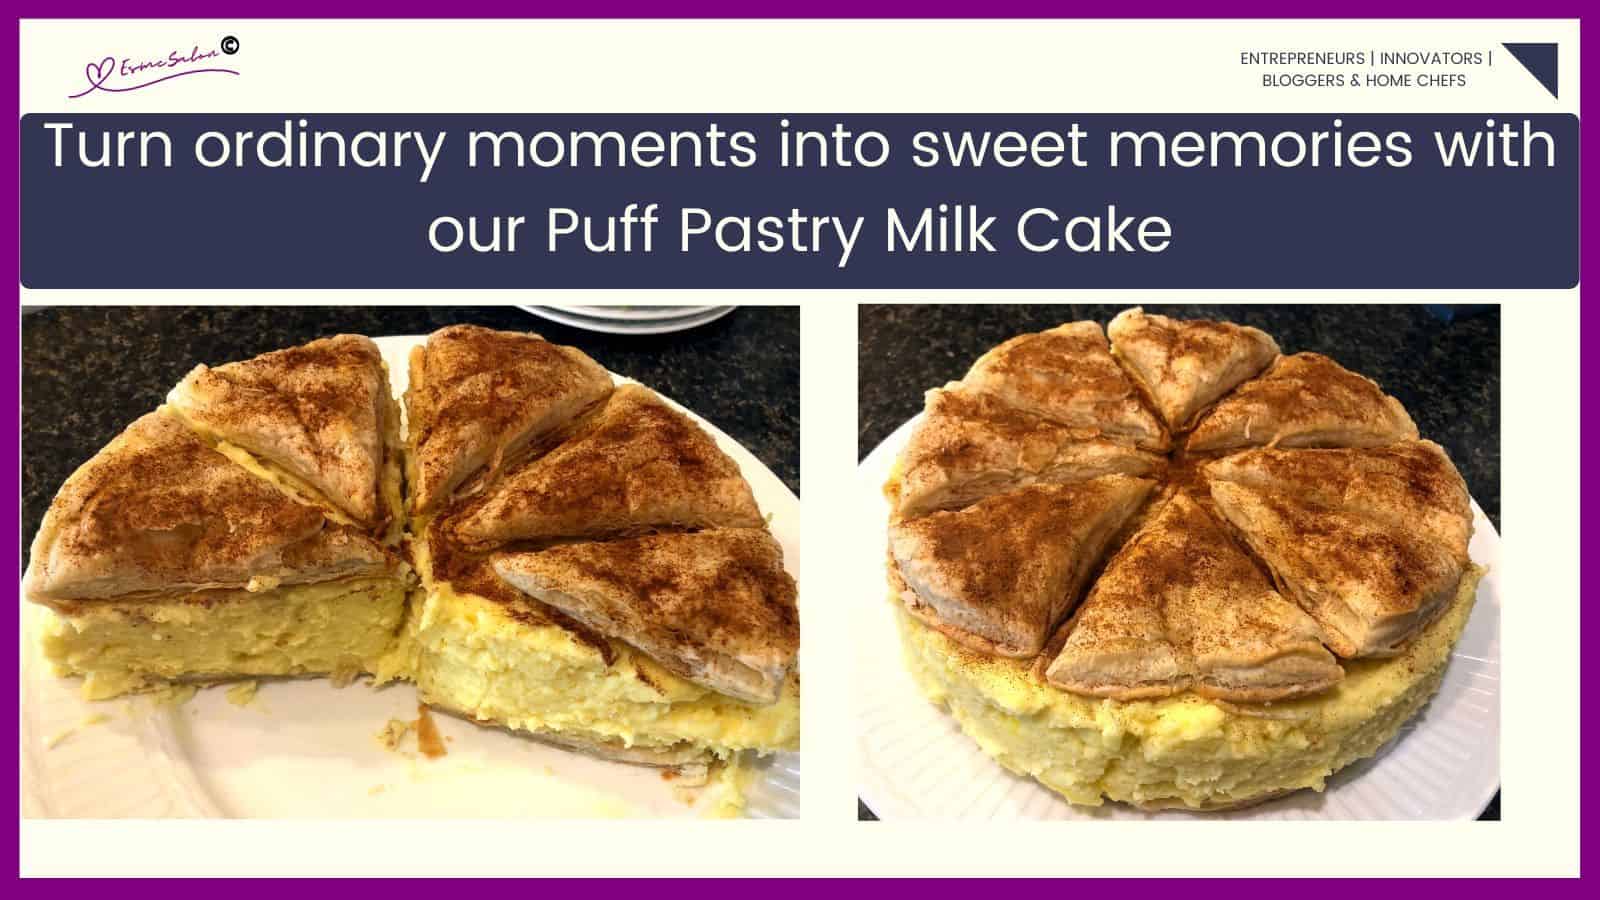 an image of an entire as well as sliced Puff Pastry Milk Cake